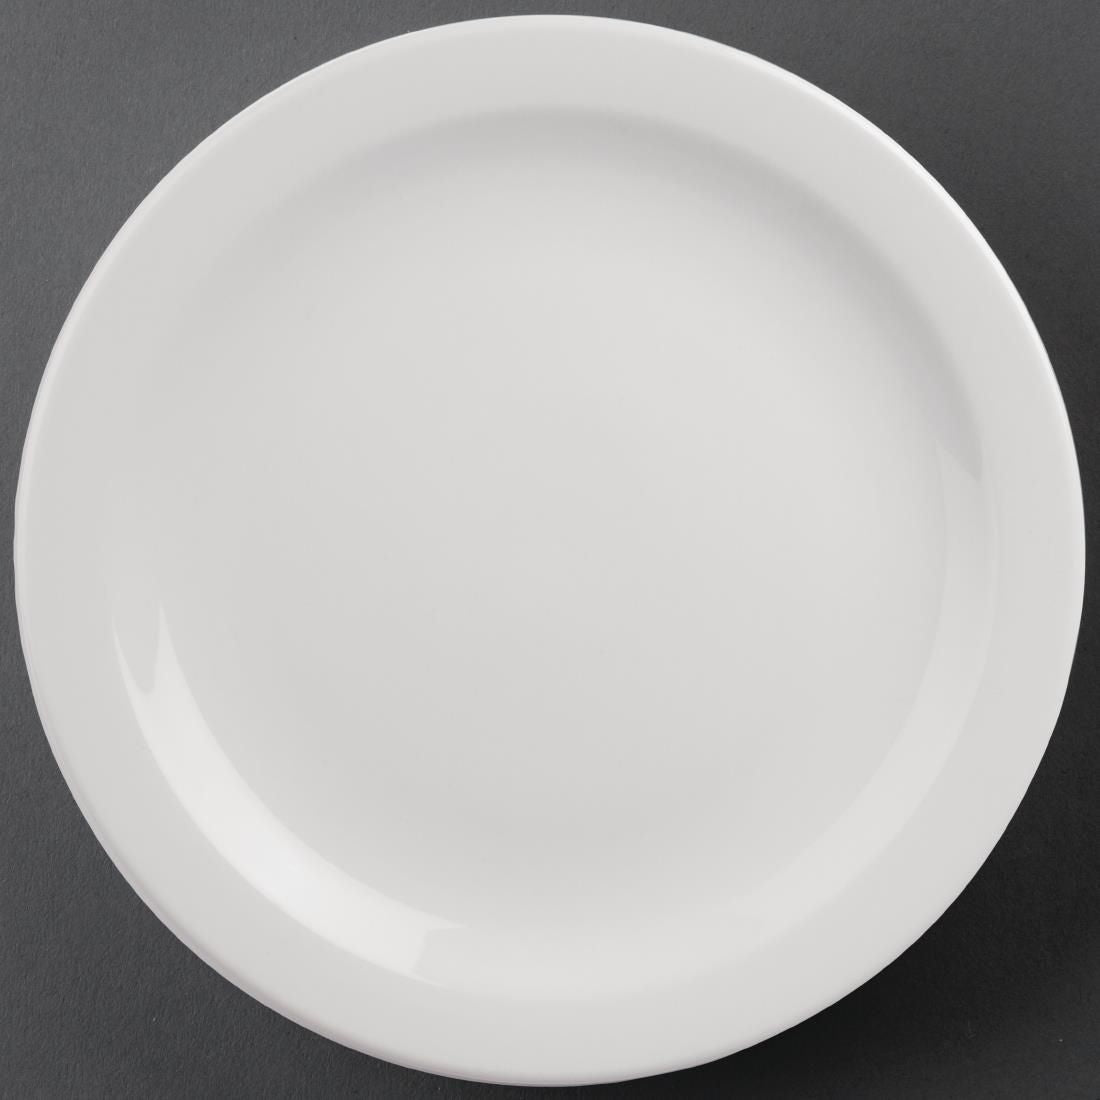 Athena Hotelware Narrow Rimmed Plates 284mm (Pack of 6) JD Catering Equipment Solutions Ltd